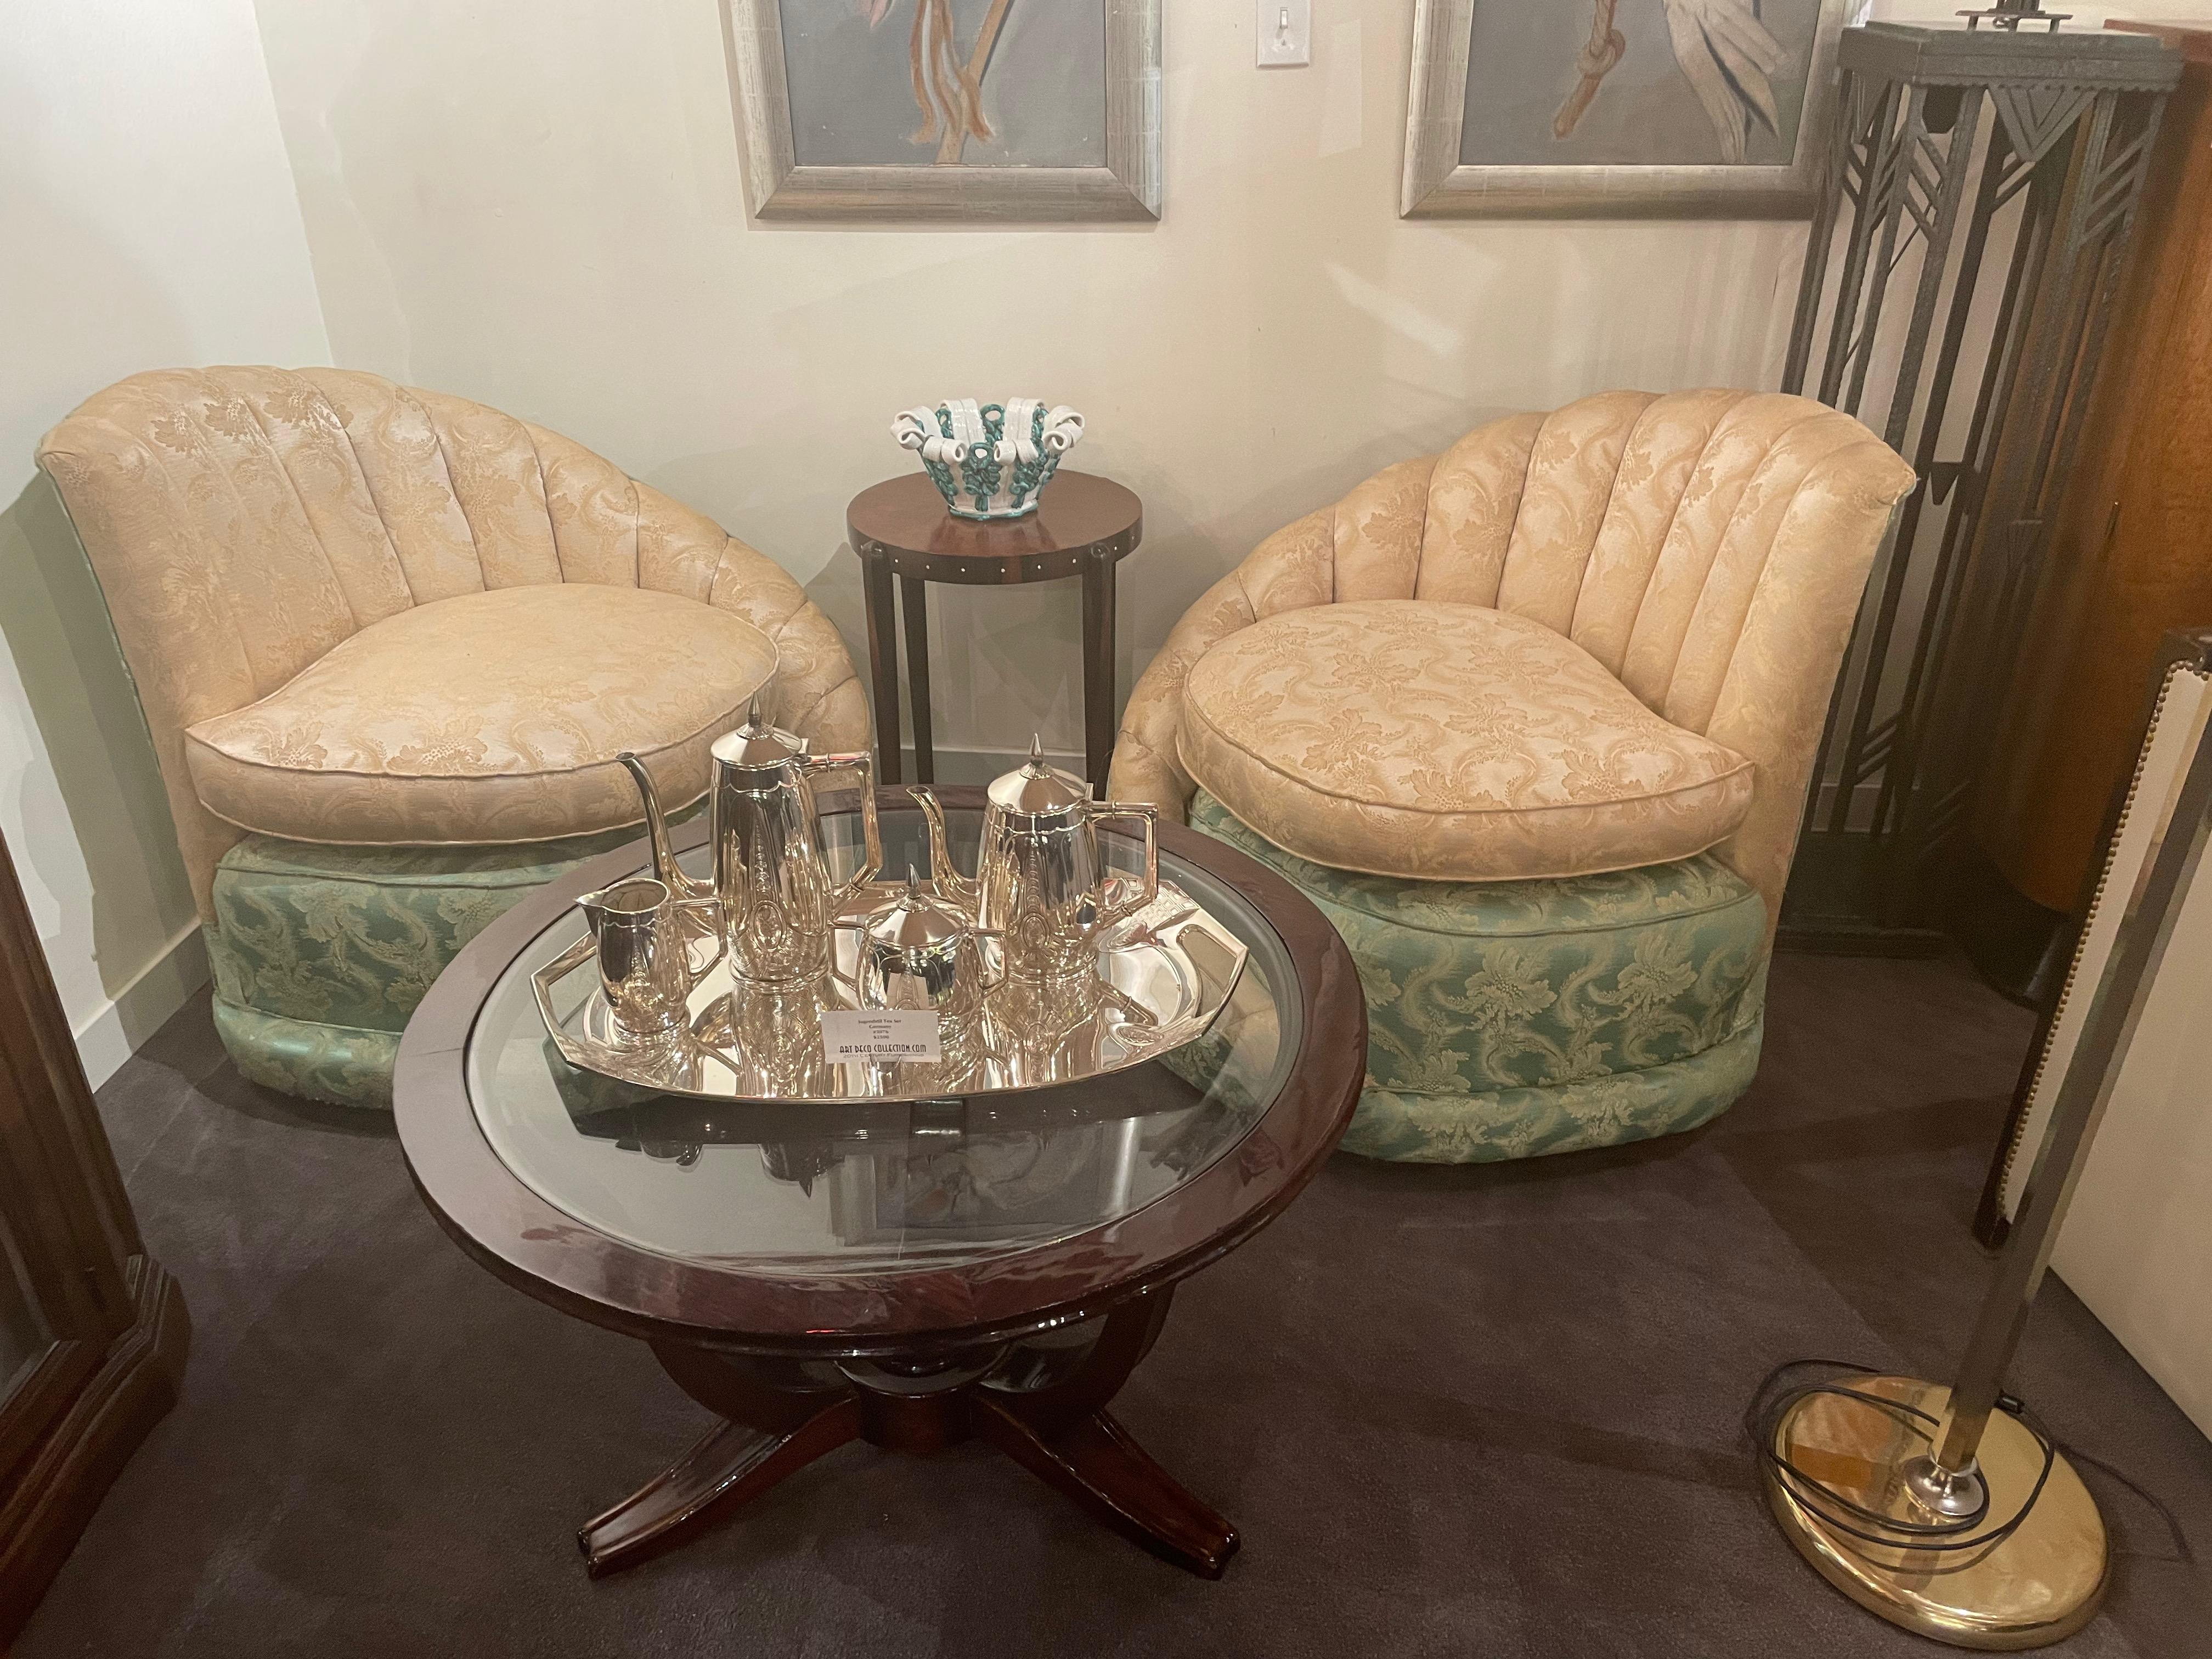 Art Deco French round wood coffee table with glass top. Classic French in the style of Lelu with tripod style elegant legs, strong and supportive with chiseled top horizontal edge design and glass insert. Recent restoration and just added to our